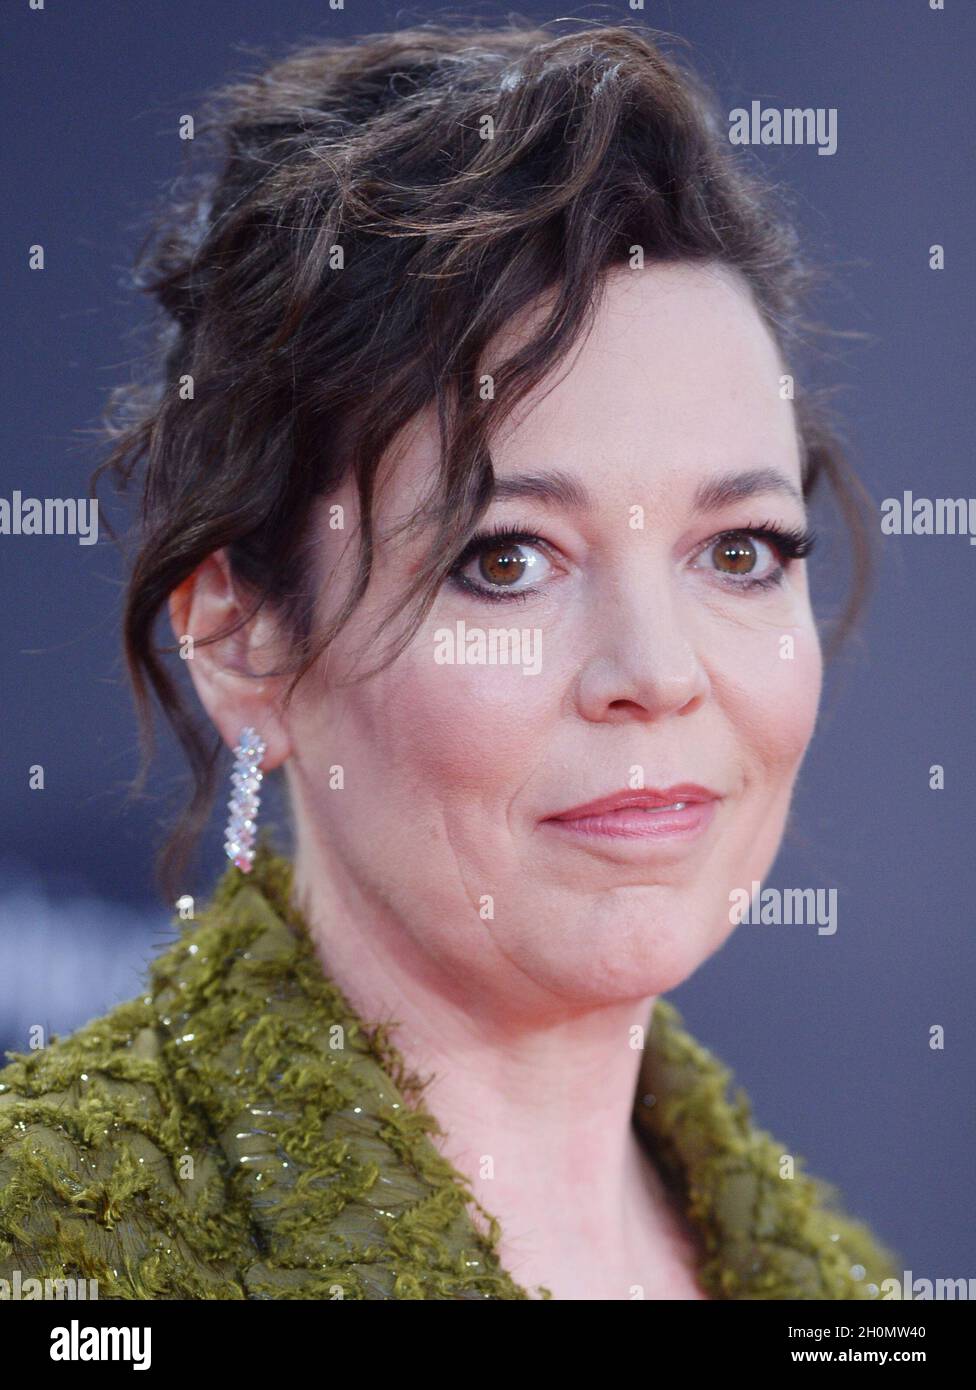 London, UK. 13th Oct, 2021. British actress Olivia Coleman attends the premiere of The Lost Daughter at the 65th BFI London Film Festival on October 13, 2021. Photo by Rune Hellestad/UPI Credit: UPI/Alamy Live News Stock Photo